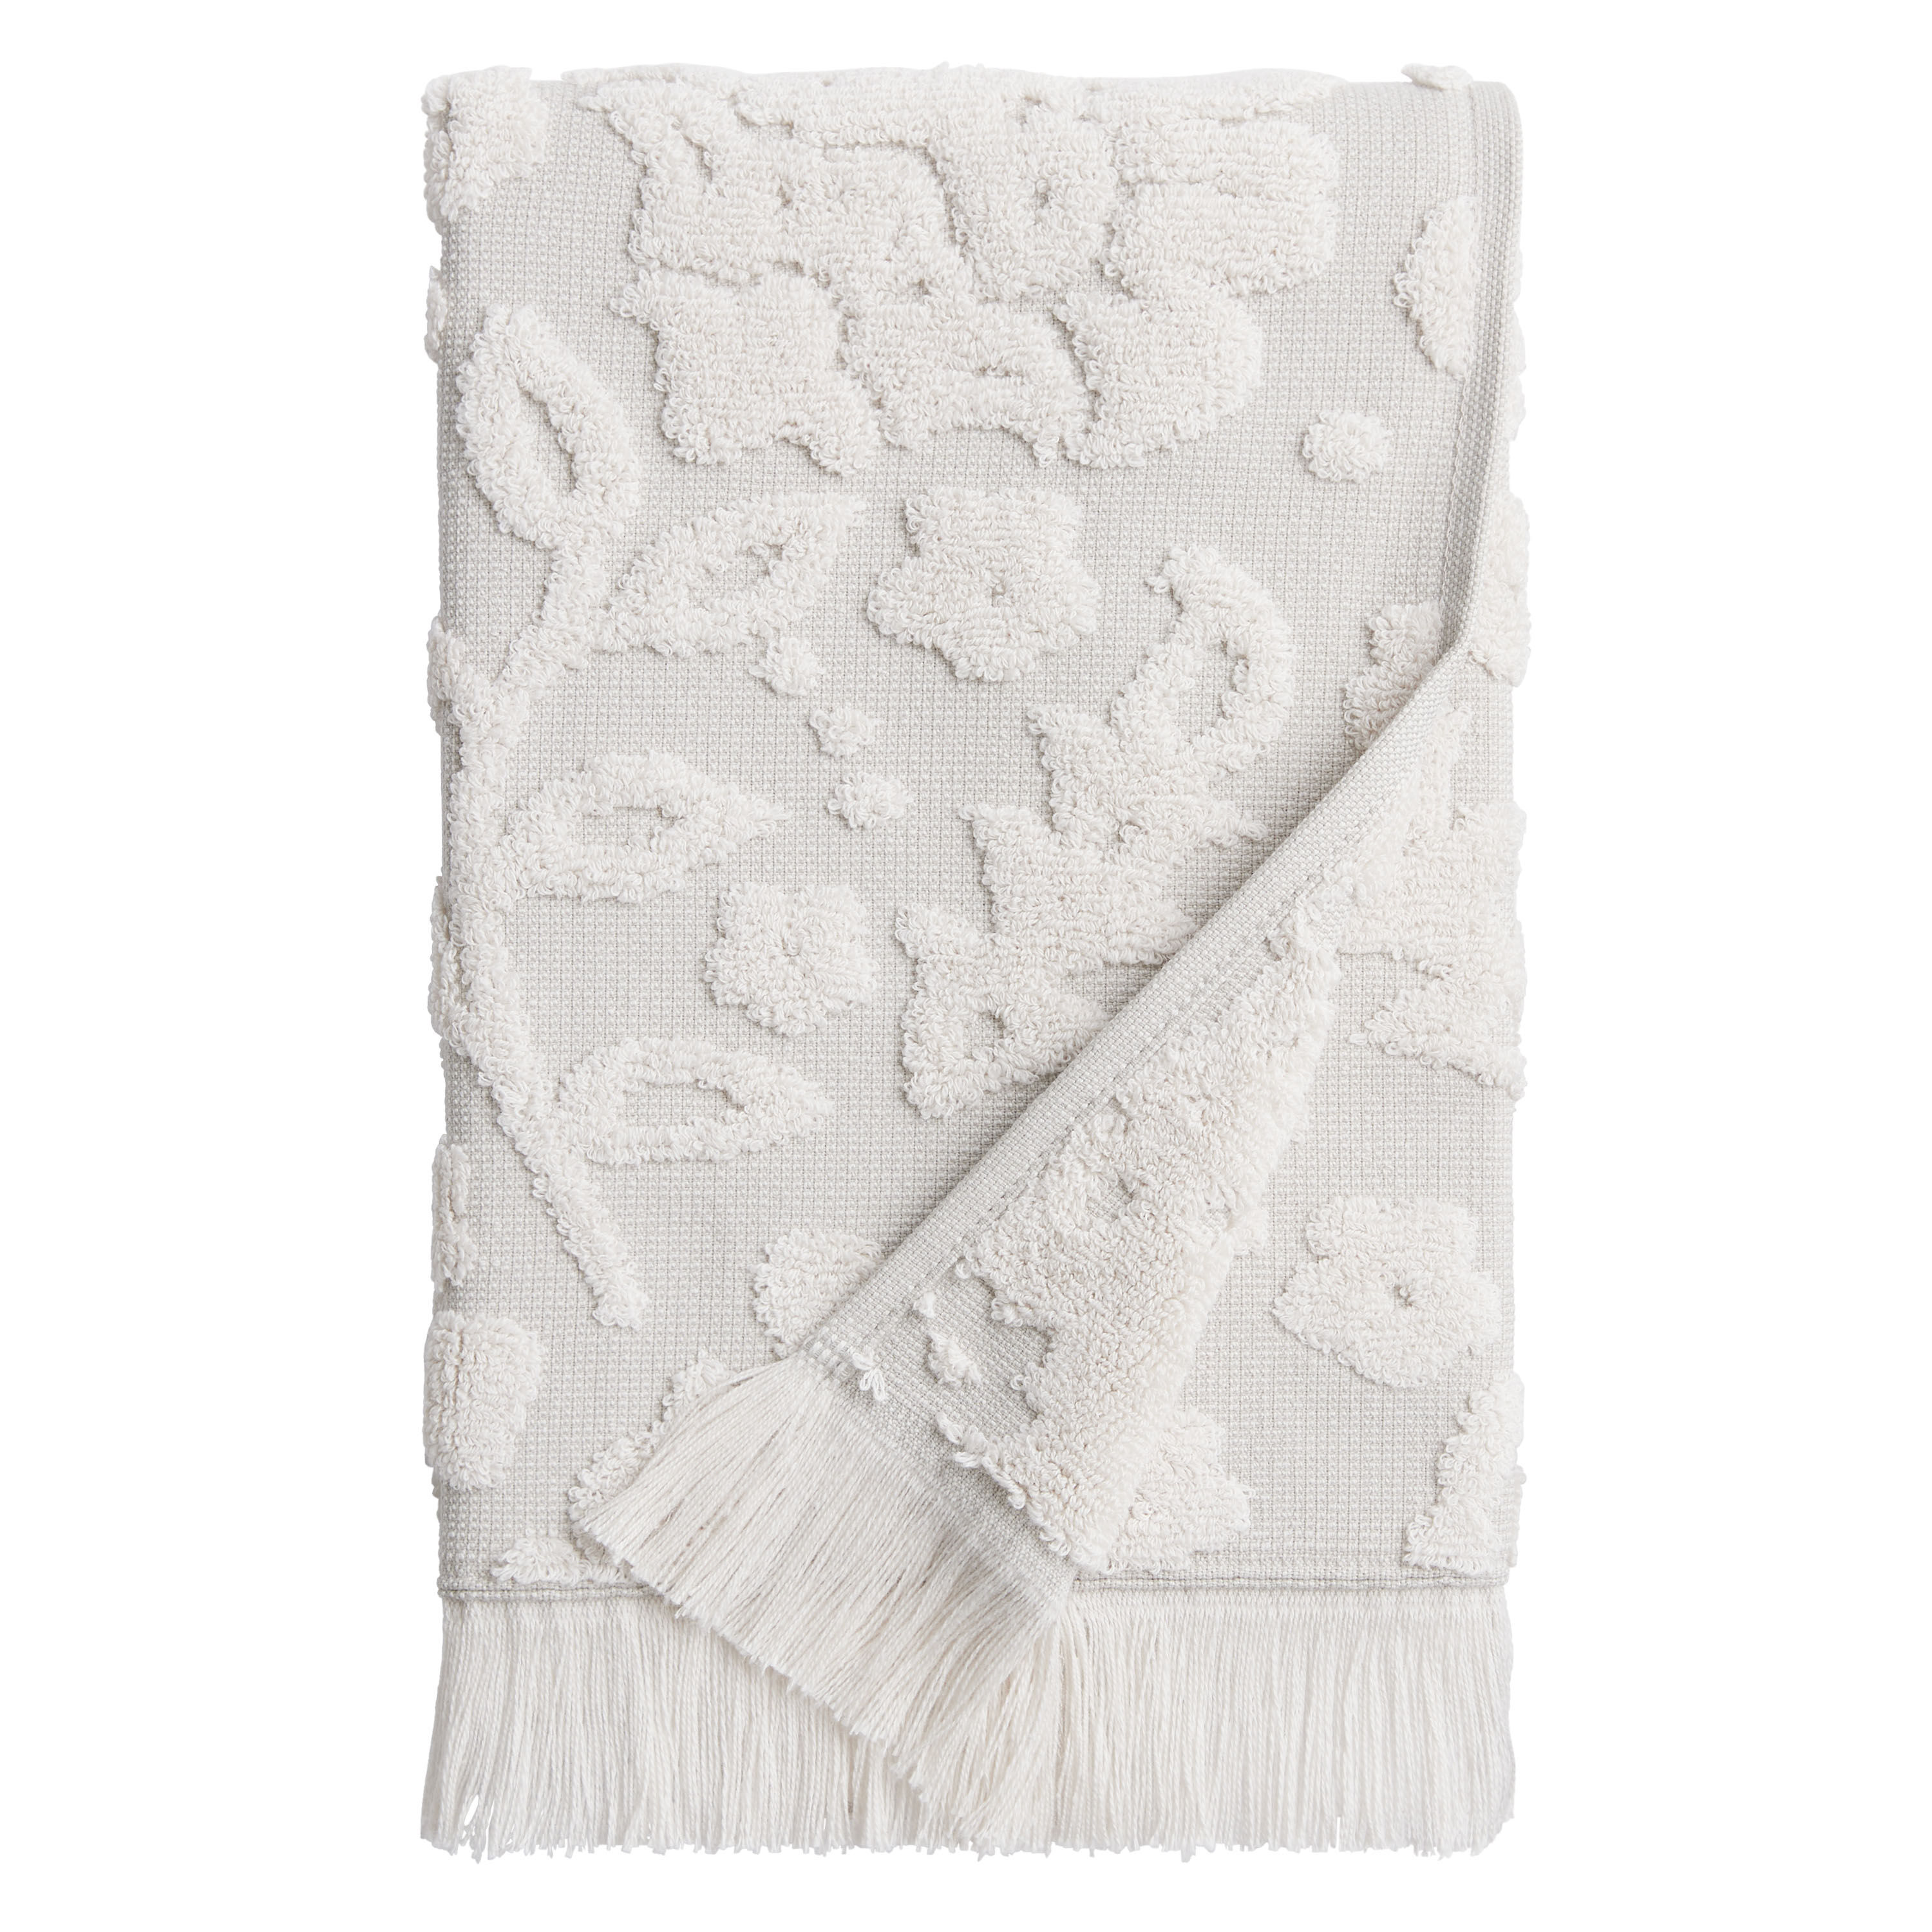 Hailey Black And White Sculpted Diamond Hand Towel